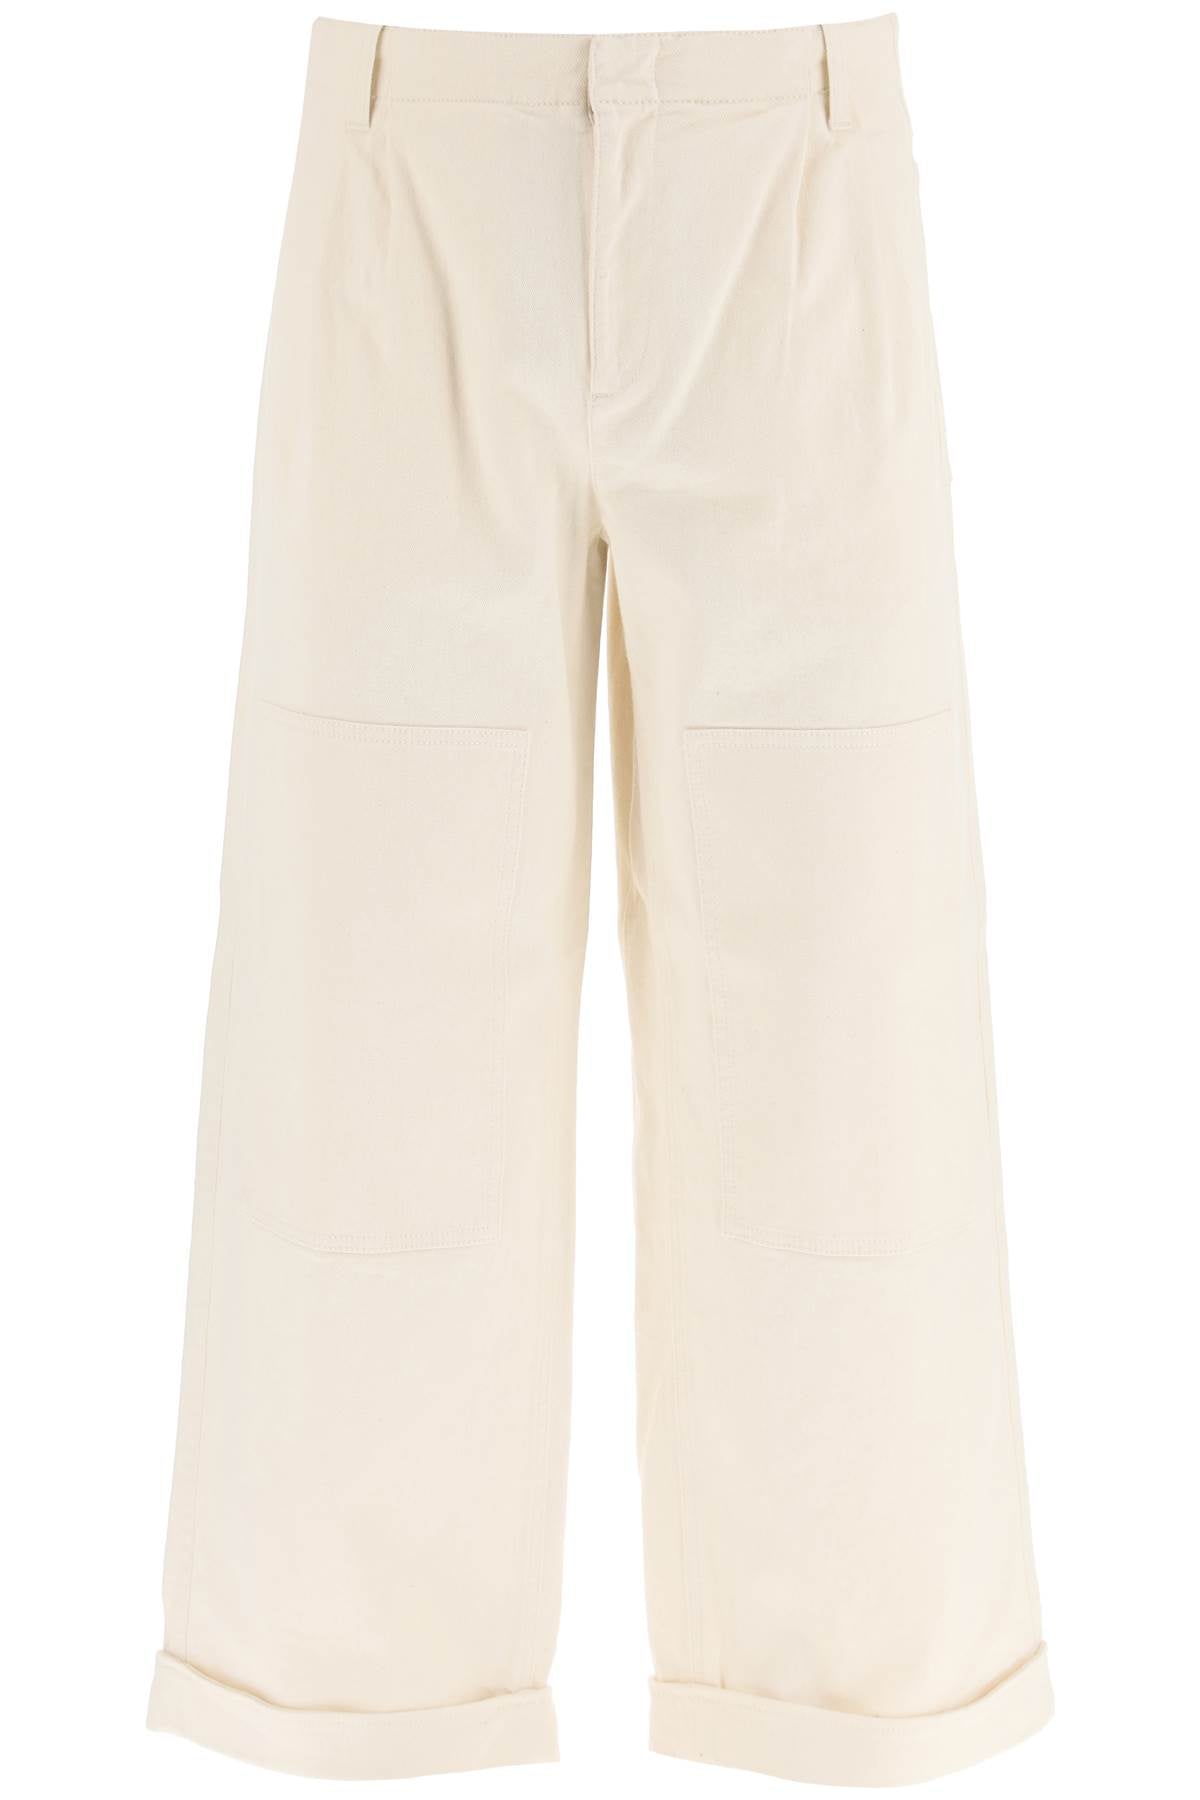 ETRO Men's White Wide Leg Pants for SS23 Collection